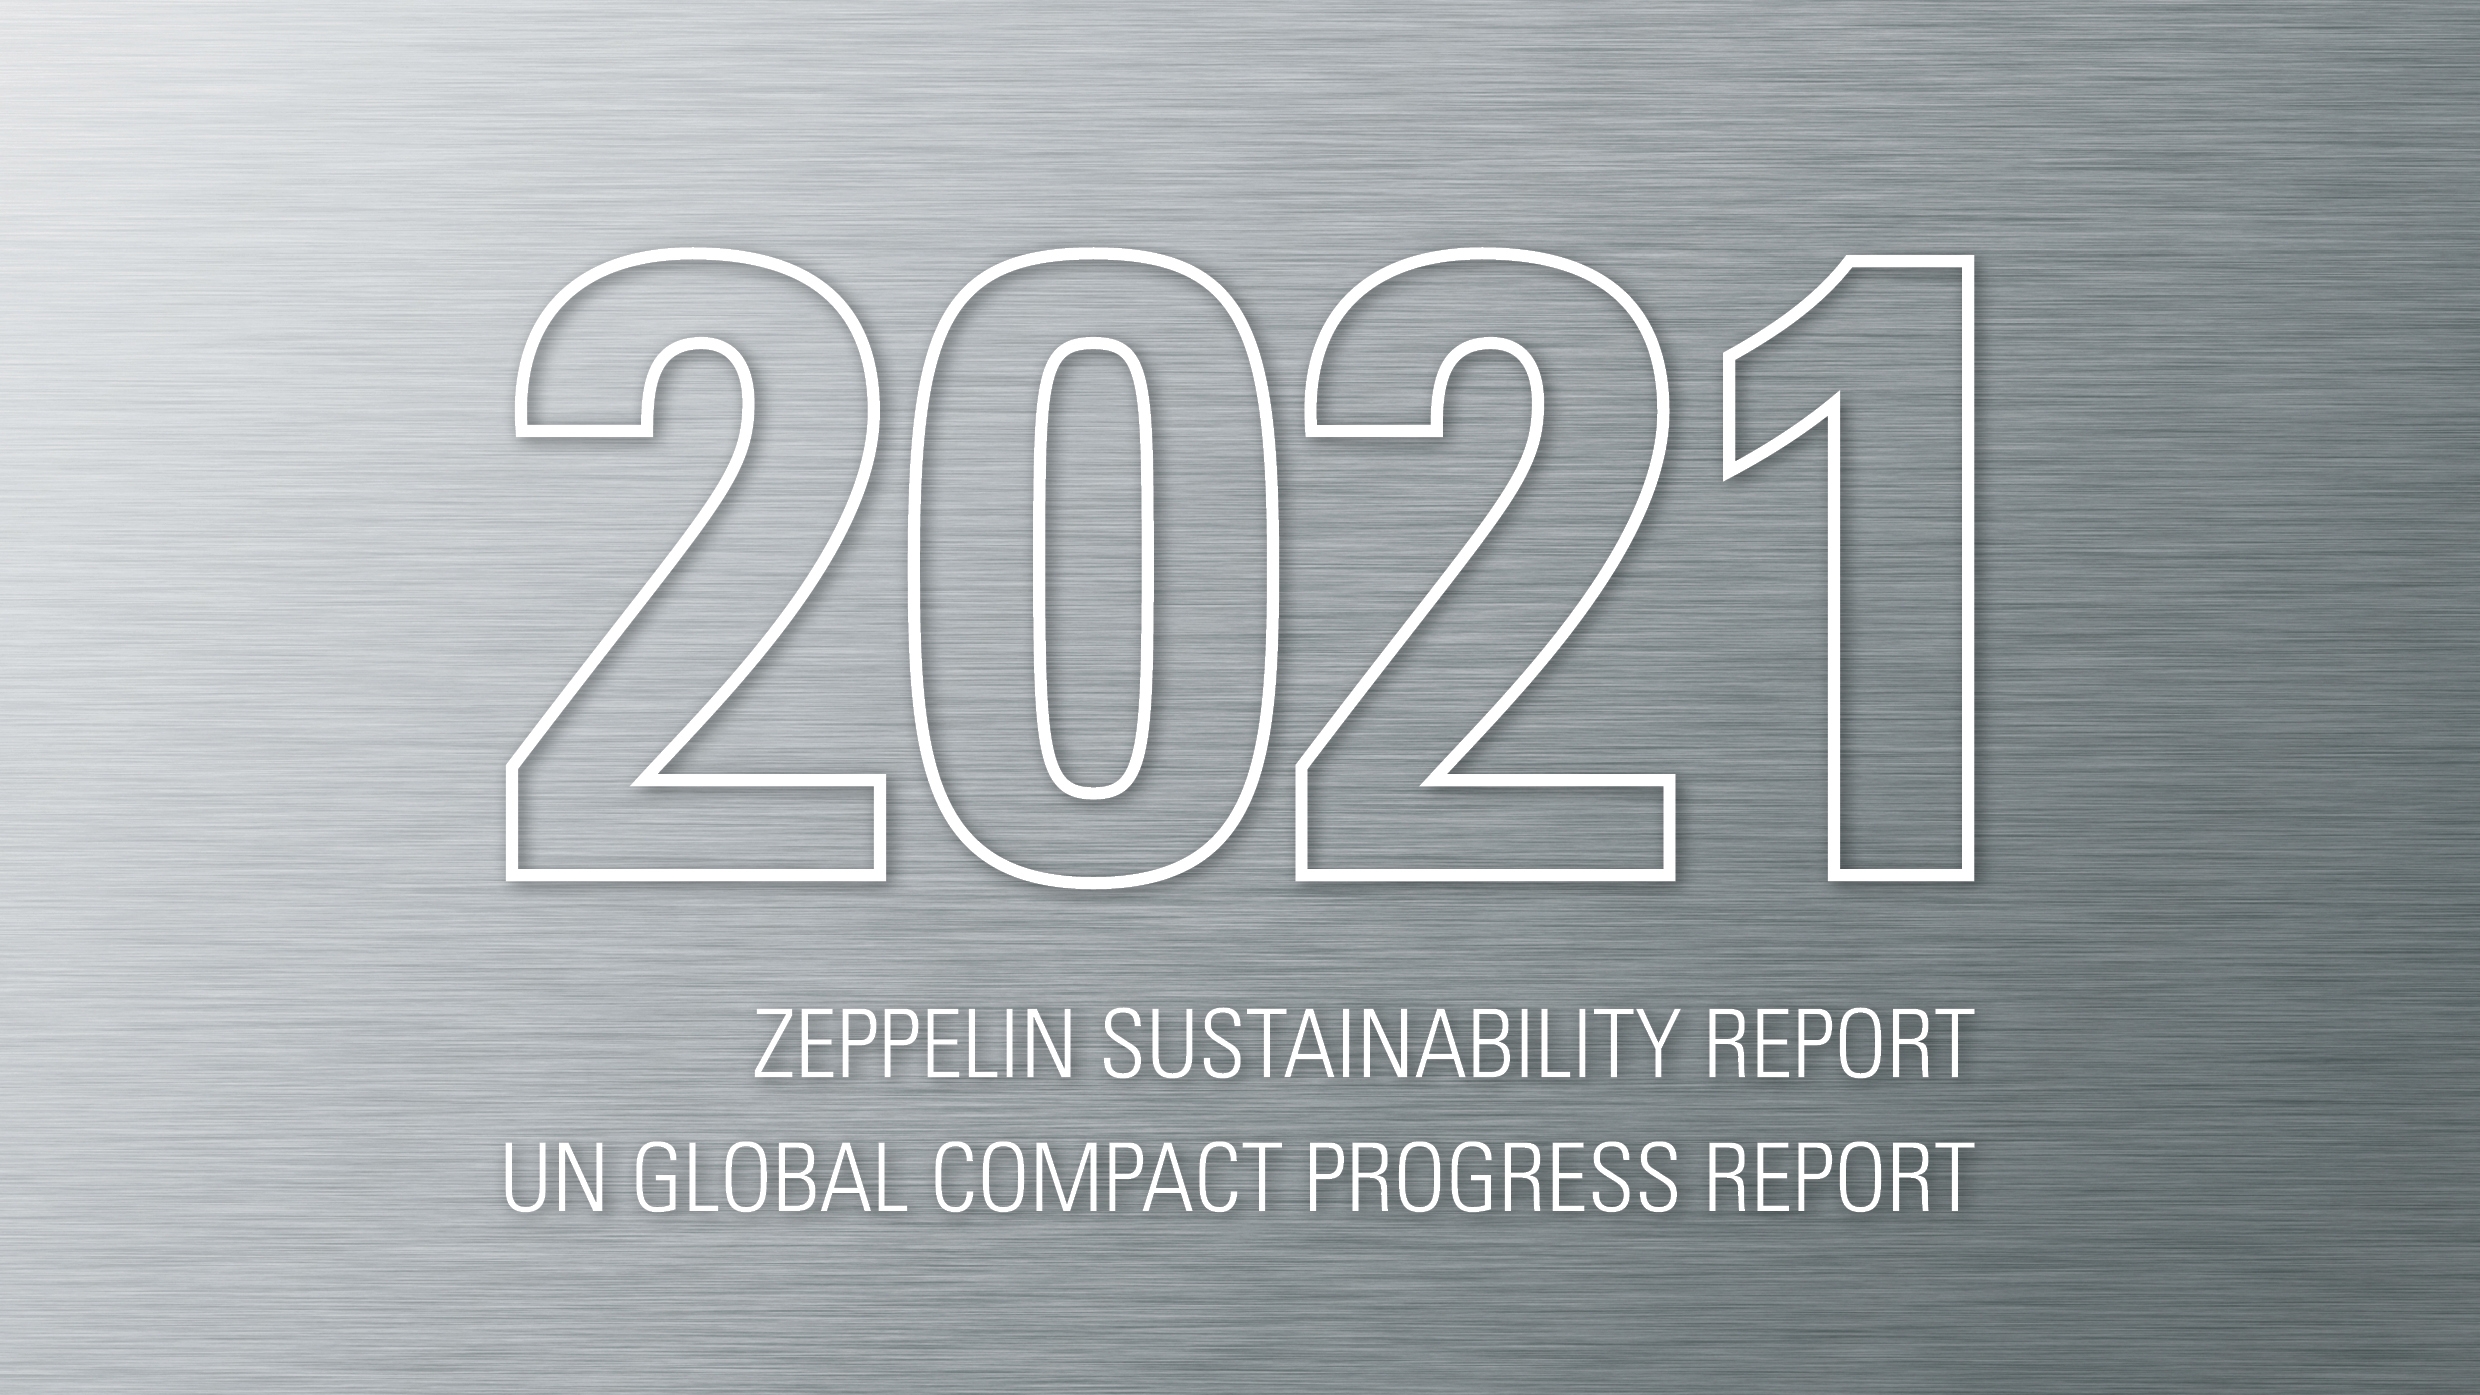 Zeppelin Group publishes 2021 Sustainability Report